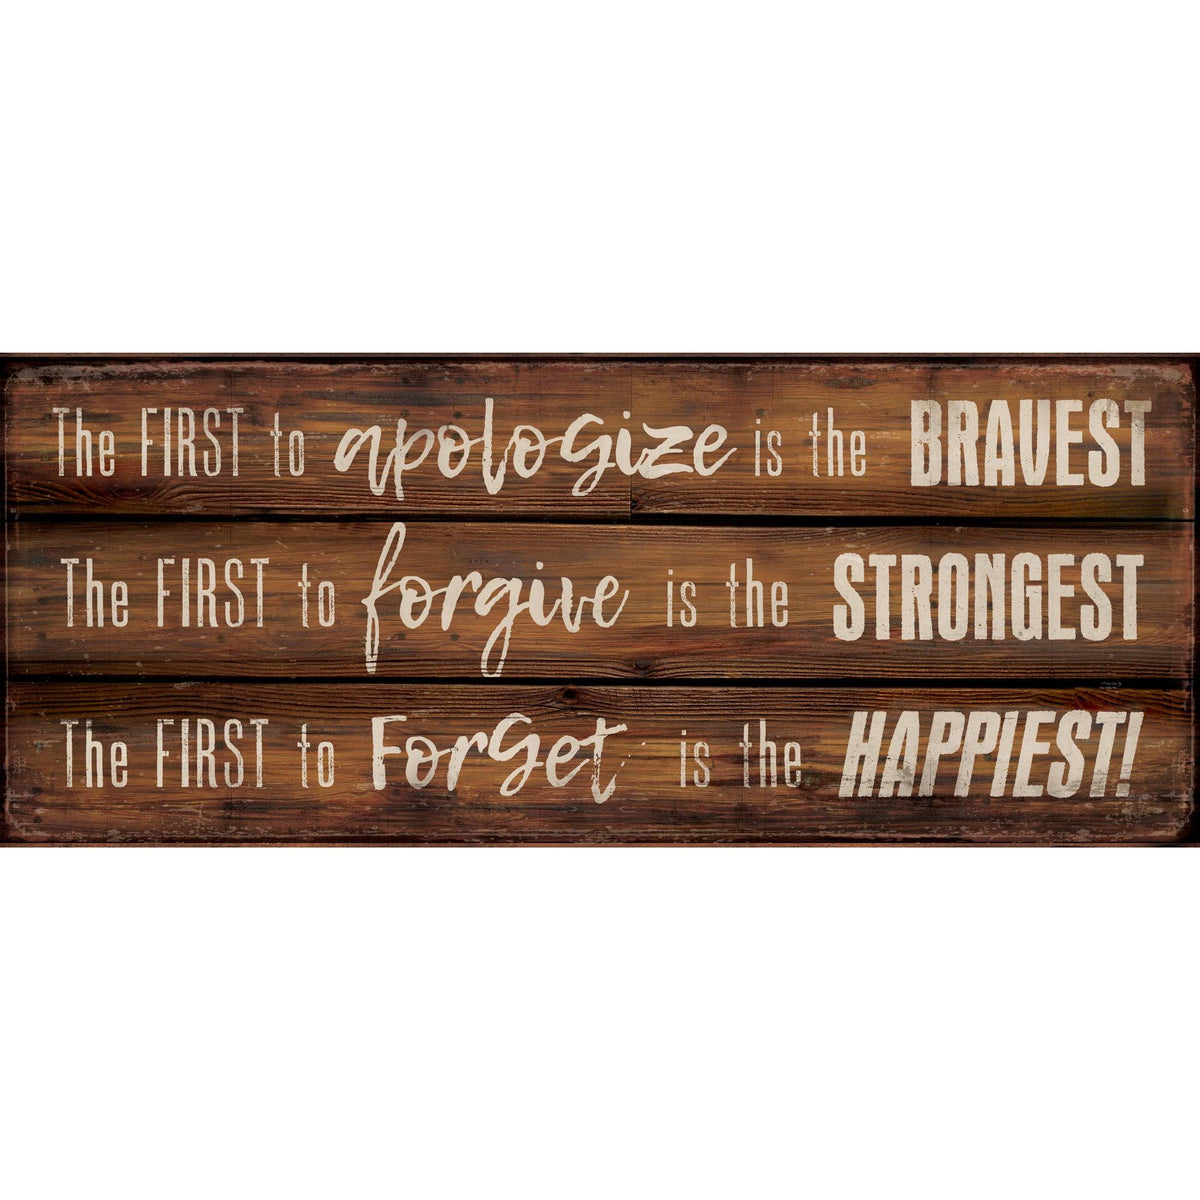 Bravest, Strongest, Happiest 12" x 30" Saw-Cut Wood Sign - Wild Wings